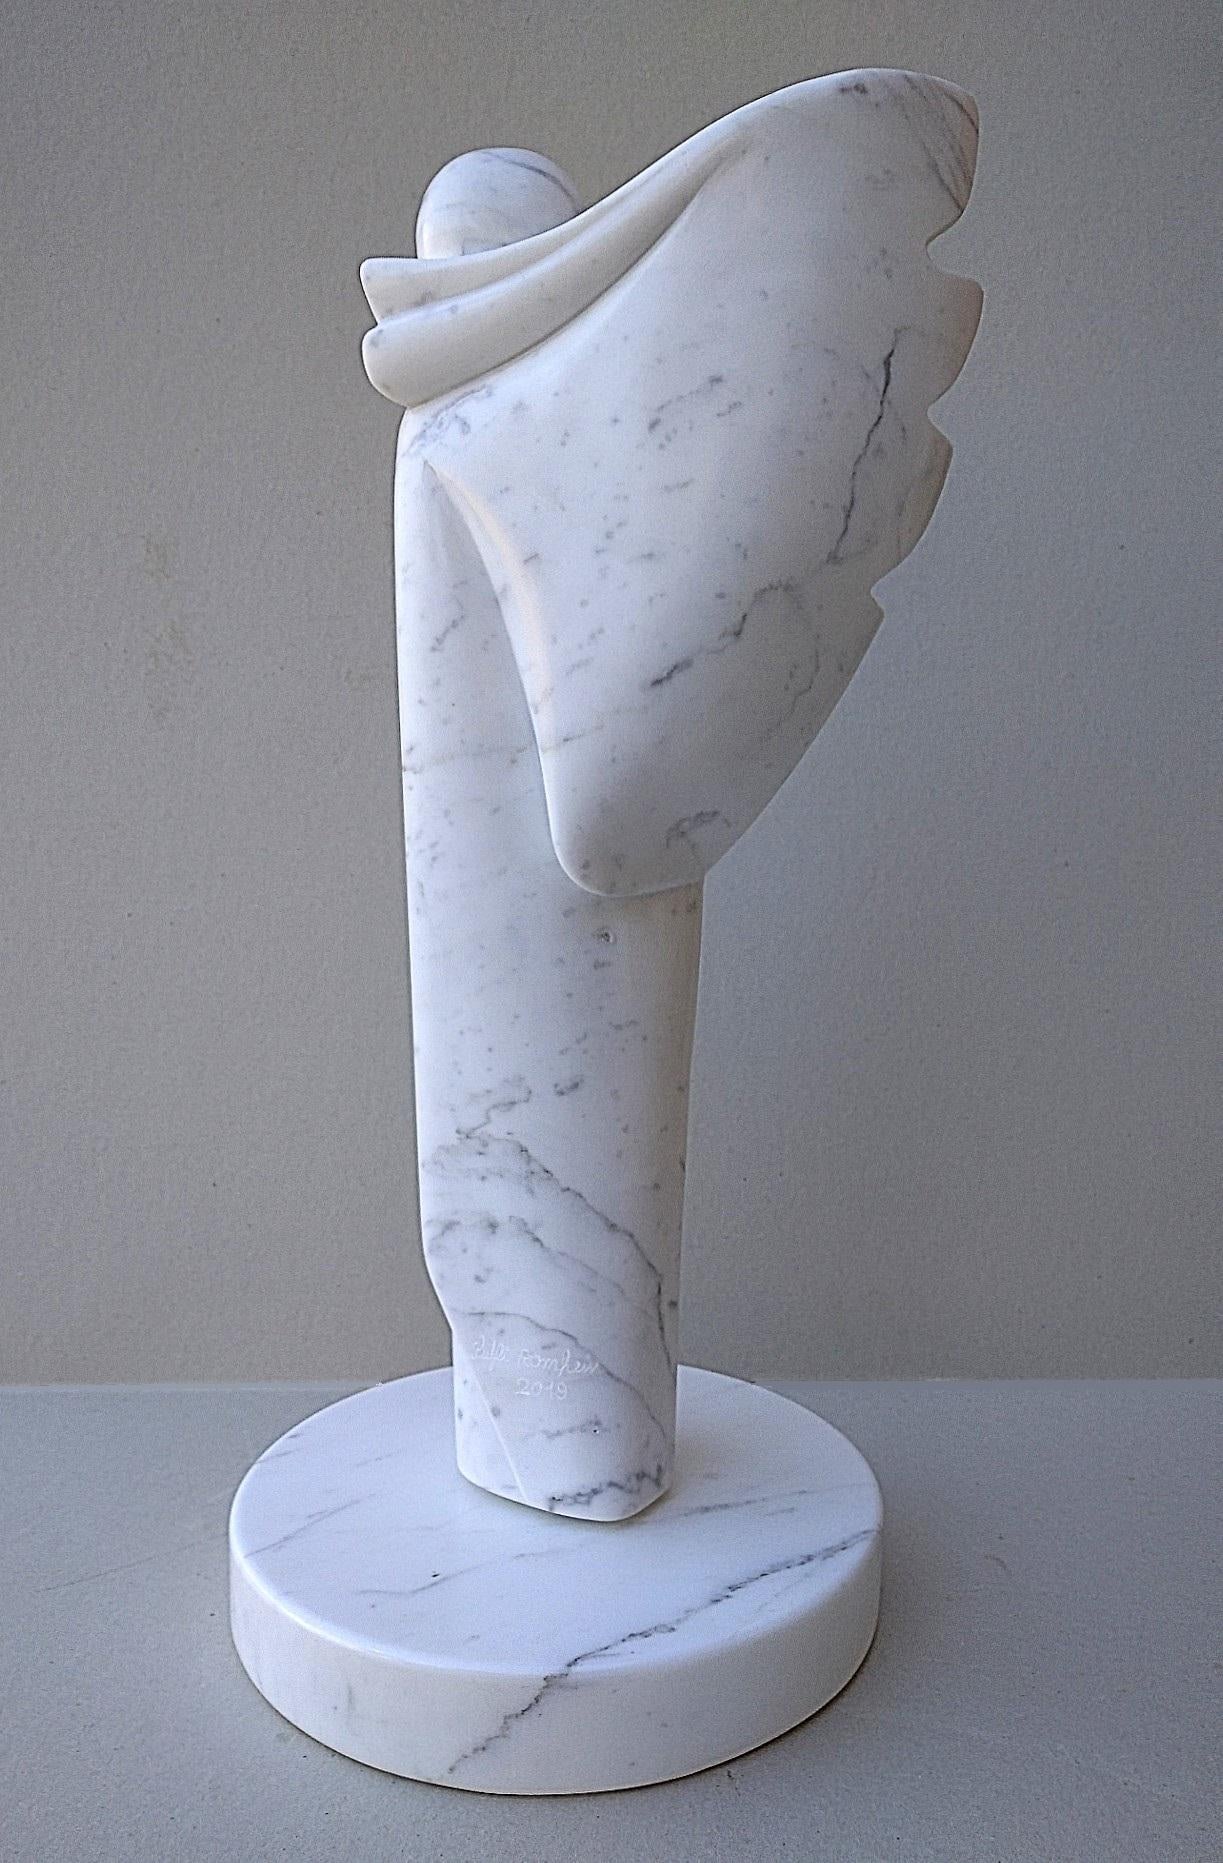 This figurative sculpture filled with interiority and peaceful presence by Lutfi Romhein is directly sculpted from veined white Carrara marble stone. Its circular independent base measures 26 cm in diameter and 4 cm in thickness.

A graduate from